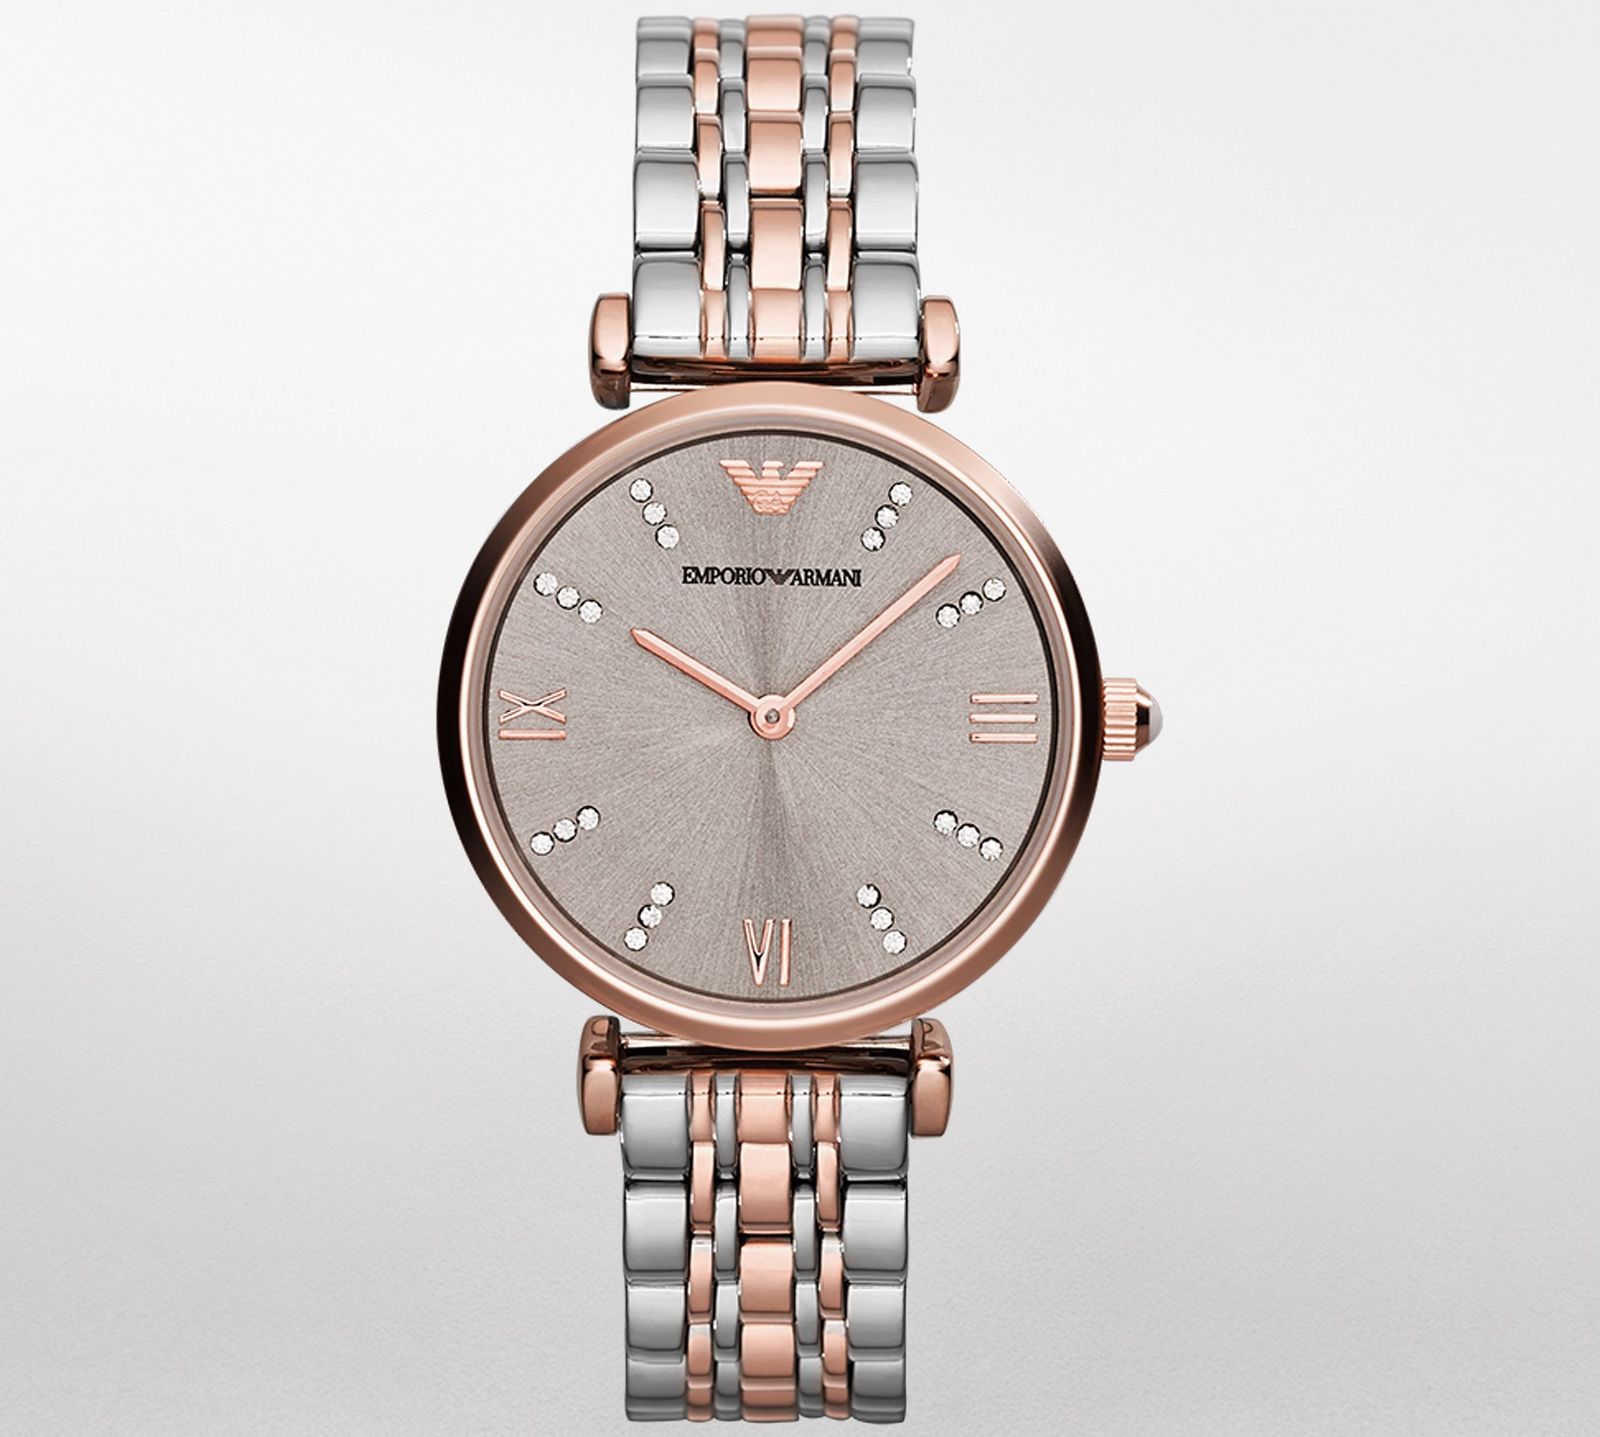 New Emporio Armani AR1840 Ladies Gianni T-Bar Steel and Rose Gold Watch